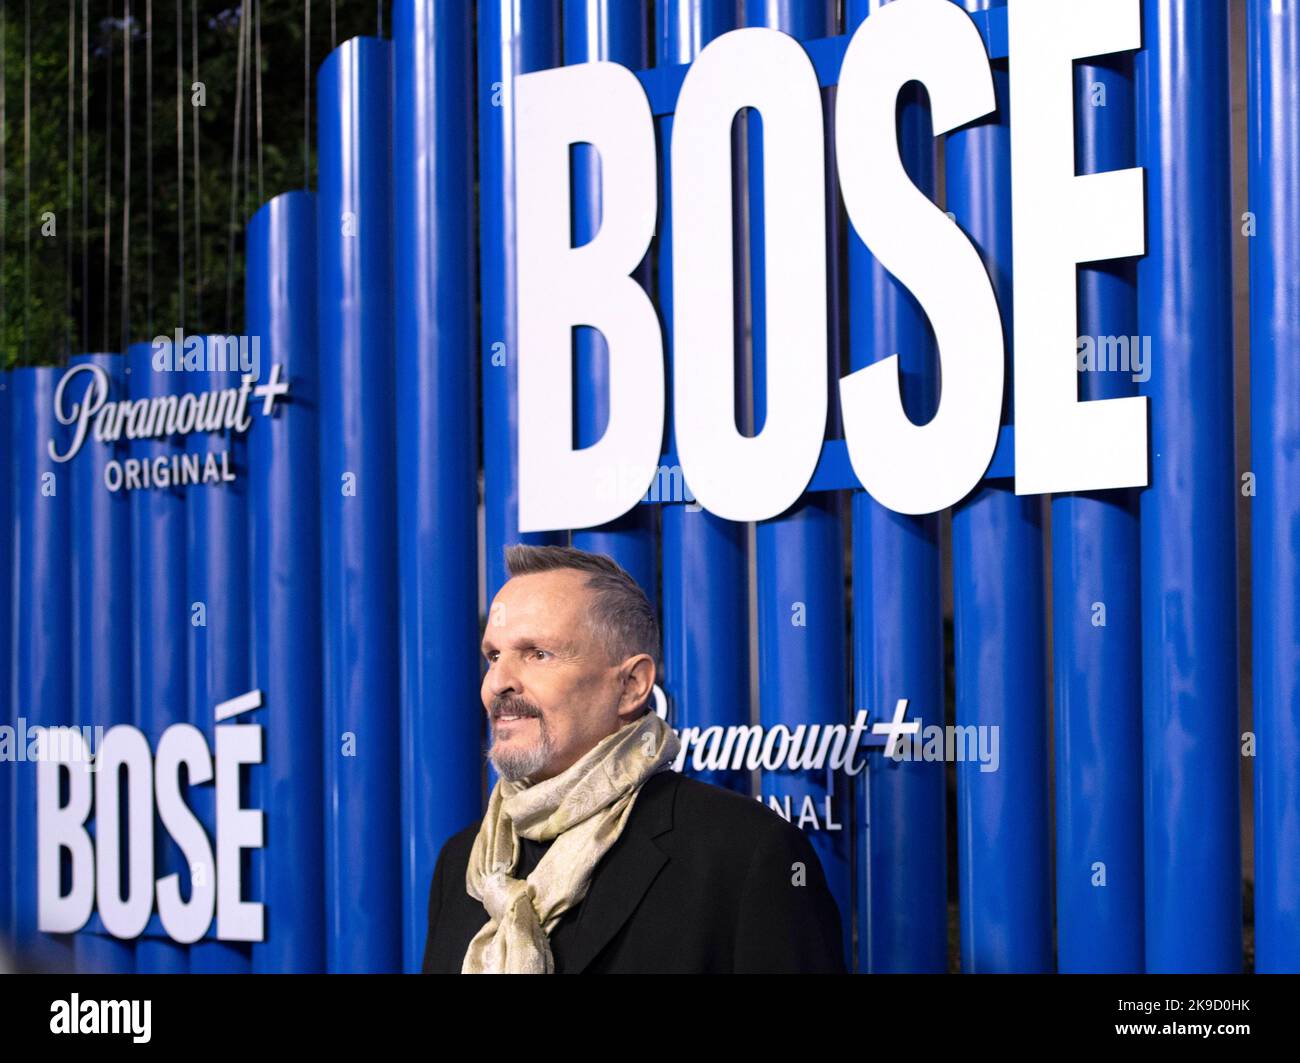 October 26, 2022, Mexico City, Mexico City, Mexico: Spanish singer MIGUEL  BOSE during a red carpet to announce the series about his life, "Bosé, Yo  Seré" produced by Paramount+ (Credit Image: ©